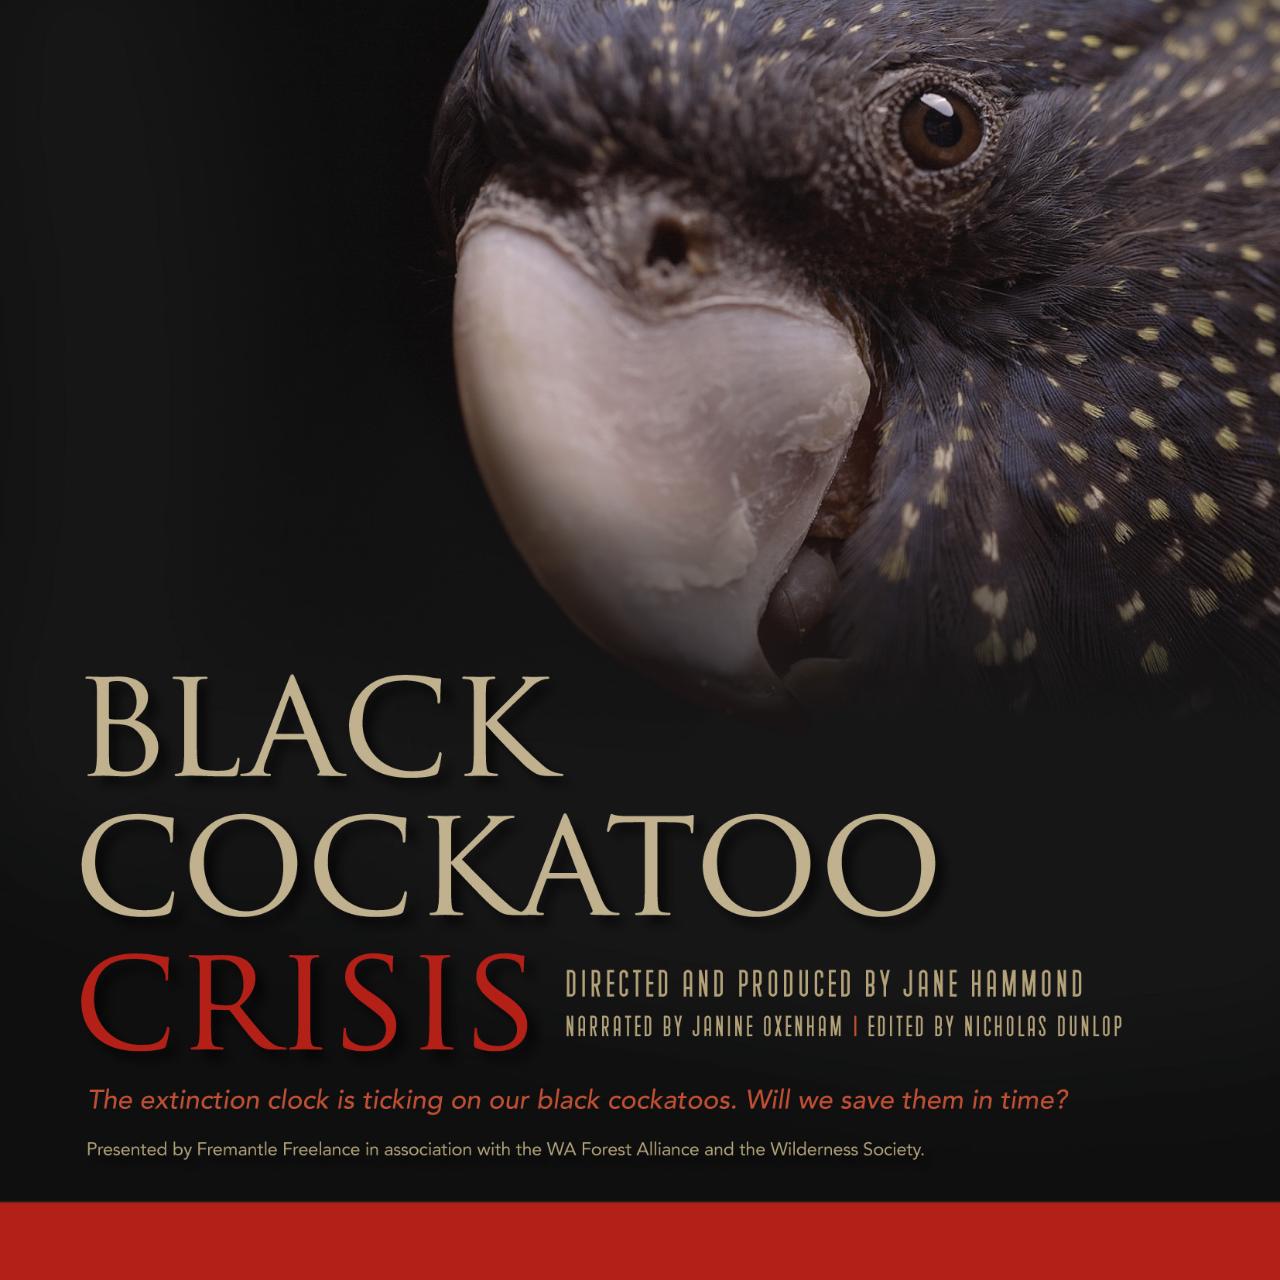 Black Cockatoo Crisis - For the Love of Birds on Valentine's Day 14th of February - Special Movie and Bird Encounter.